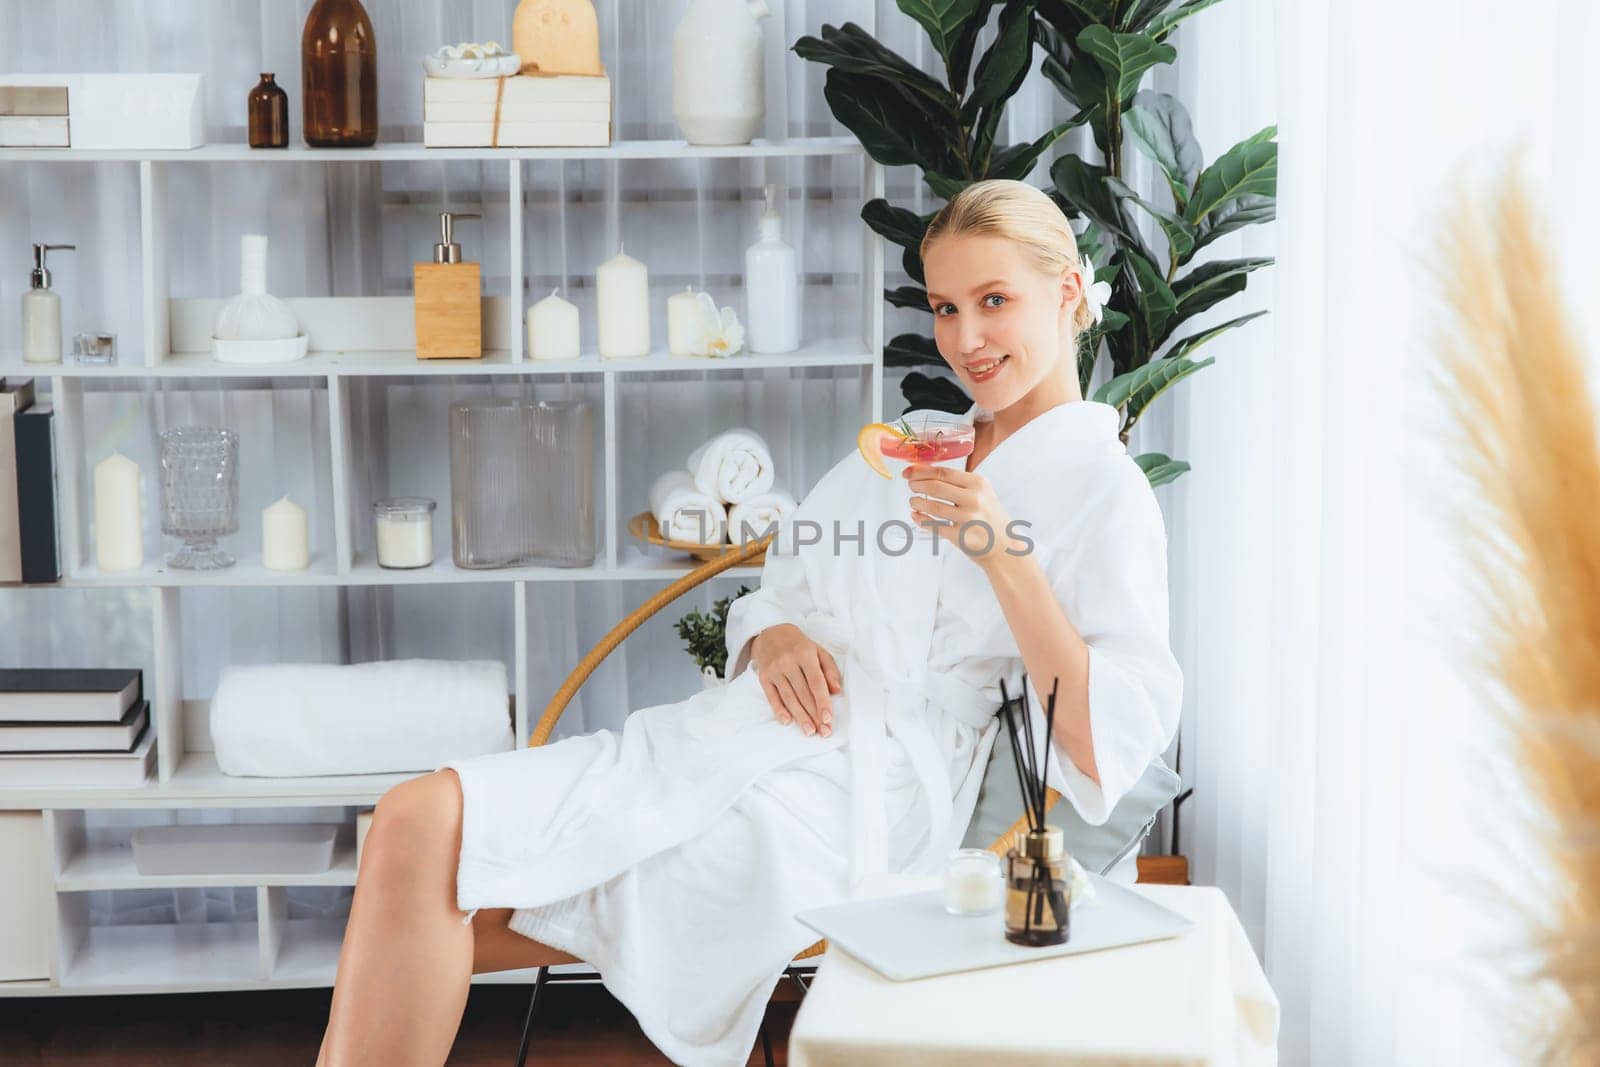 Beauty or body treatment spa salon vacation lifestyle concept with woman wearing bathrobe relaxing with drinks in luxurious hotel spa or resort room. Vacation and leisure relaxation. Quiescent